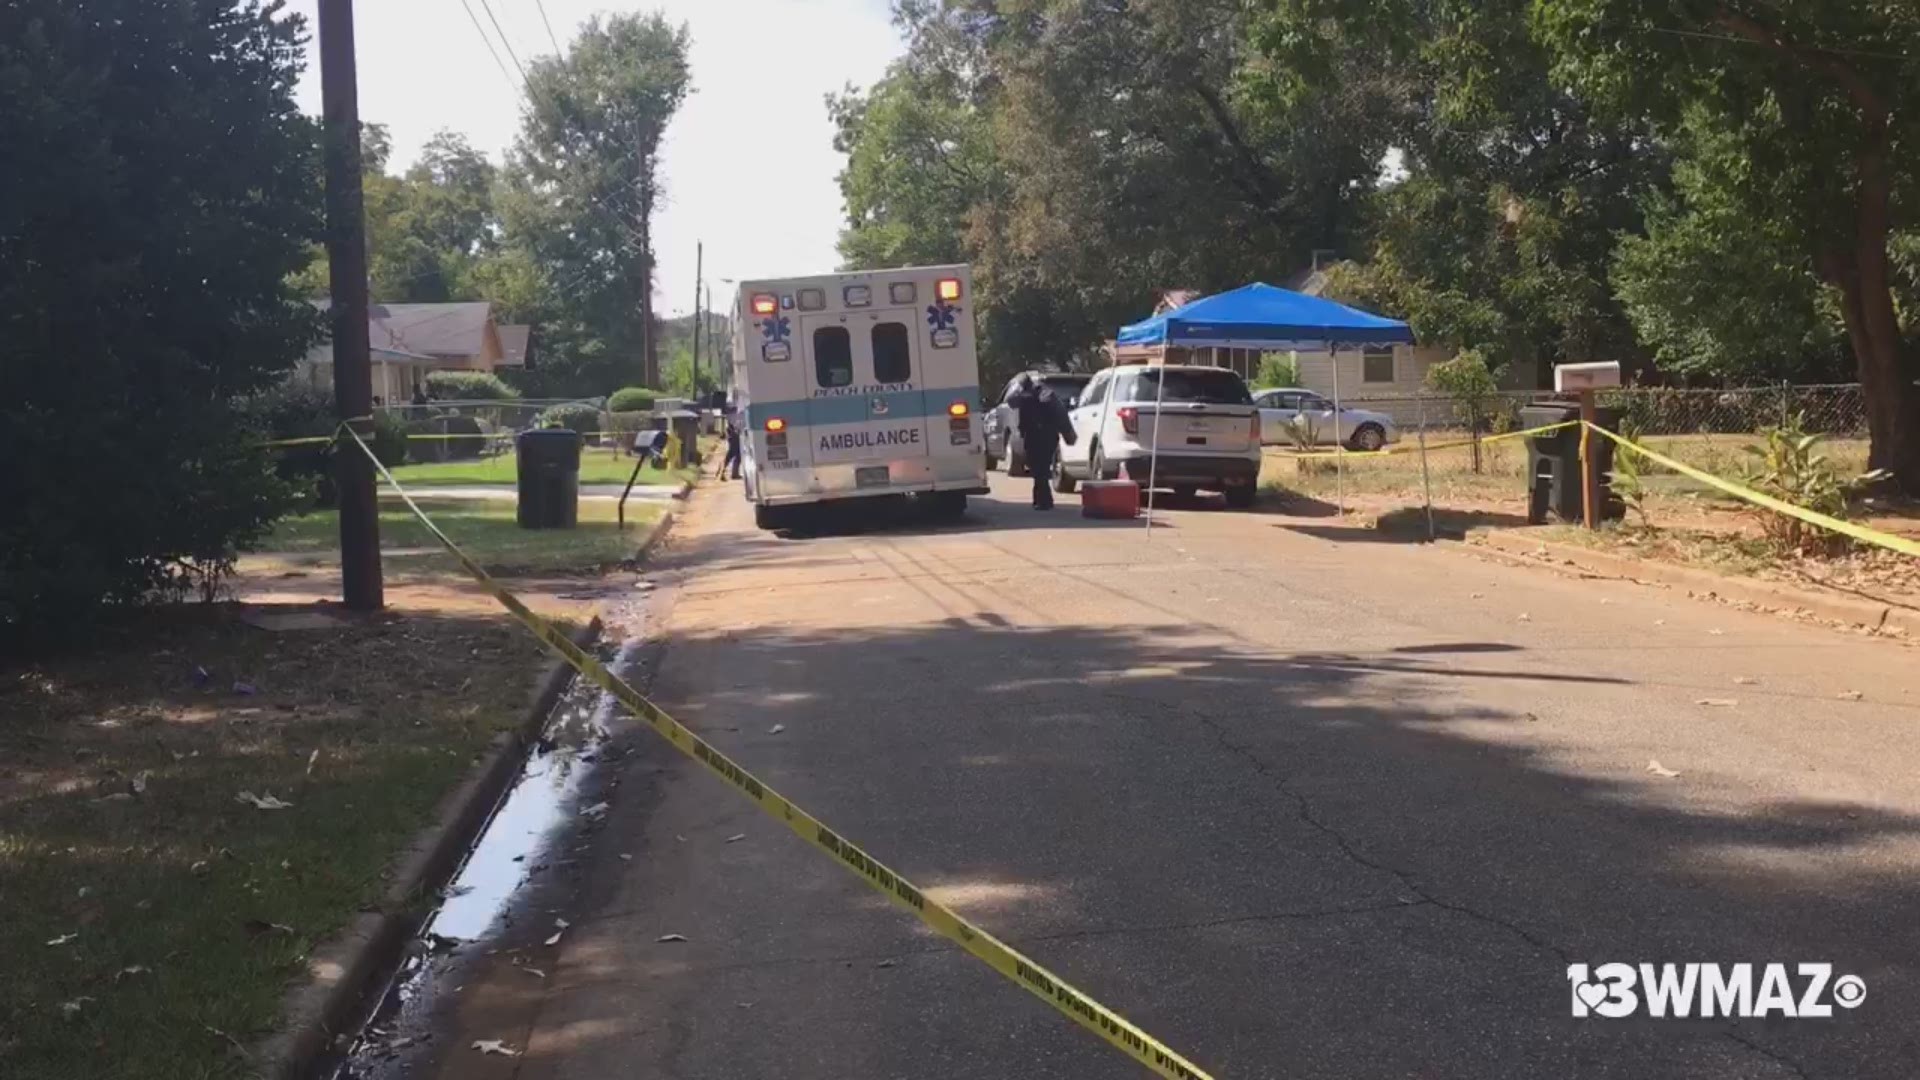 When police arrived at the scene, they found a 4-year-old boy shot in the head.